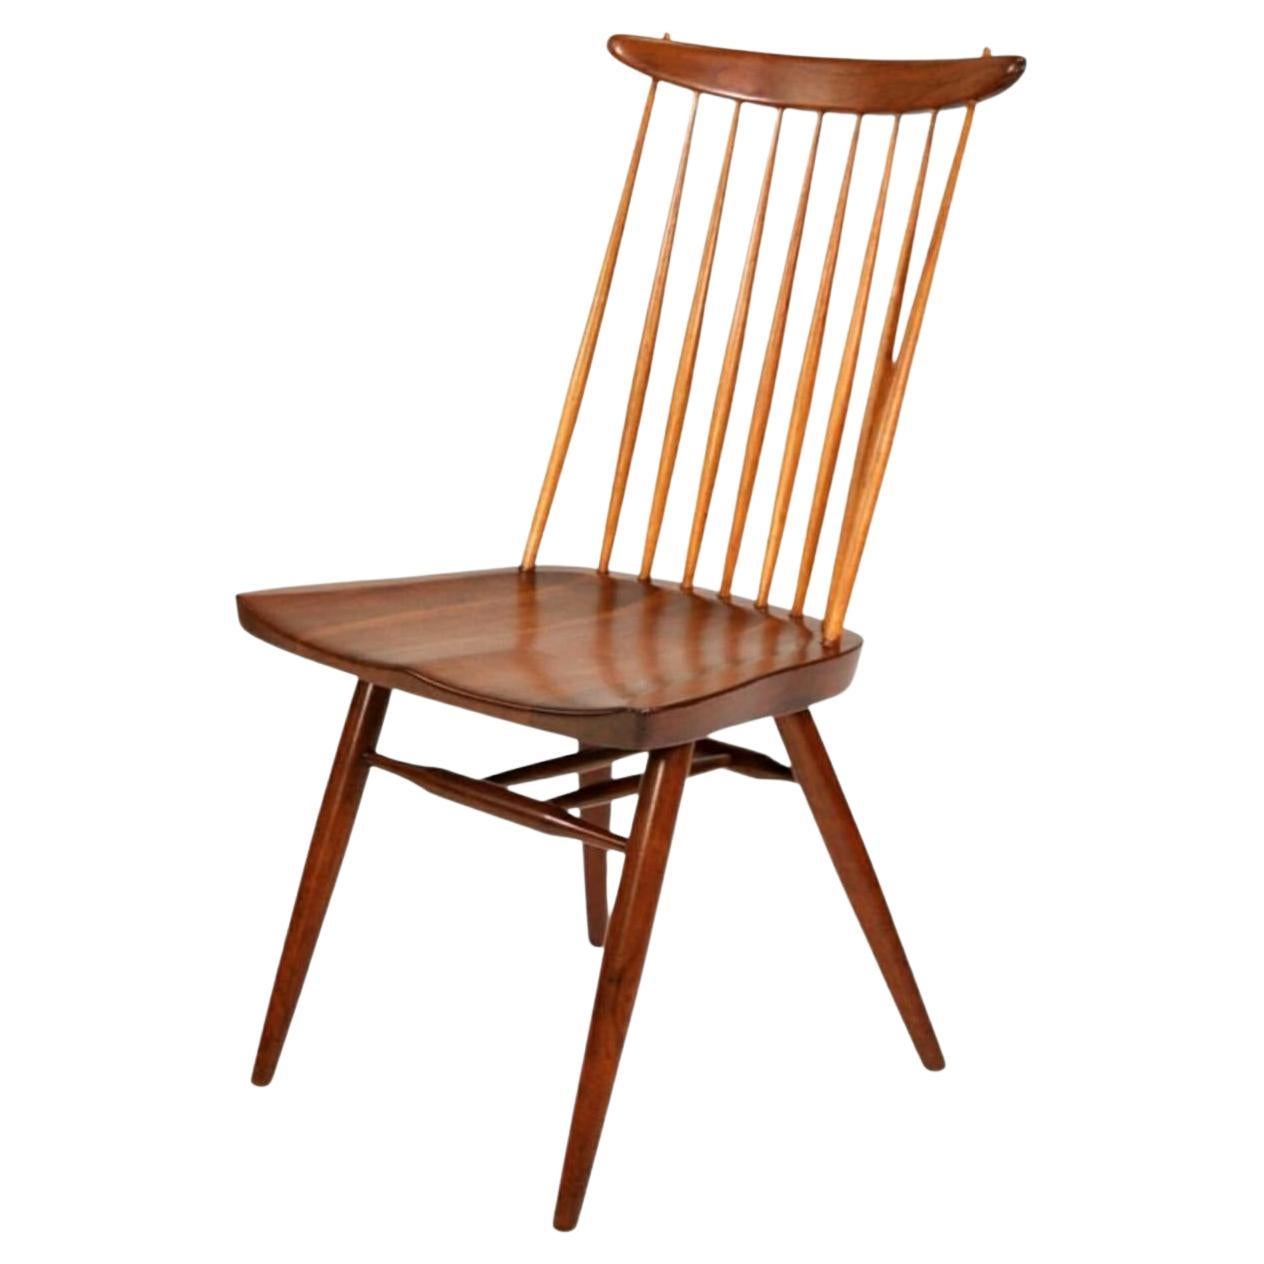 Rare and early model 271 or New Chair, the iconic Windsor spindle back chair reimagined by Japanese-American Master Woodworker, George Nakashima in 1956. East Indian Laurel wood in the original Sundra finish with hickory spindles. Branded with